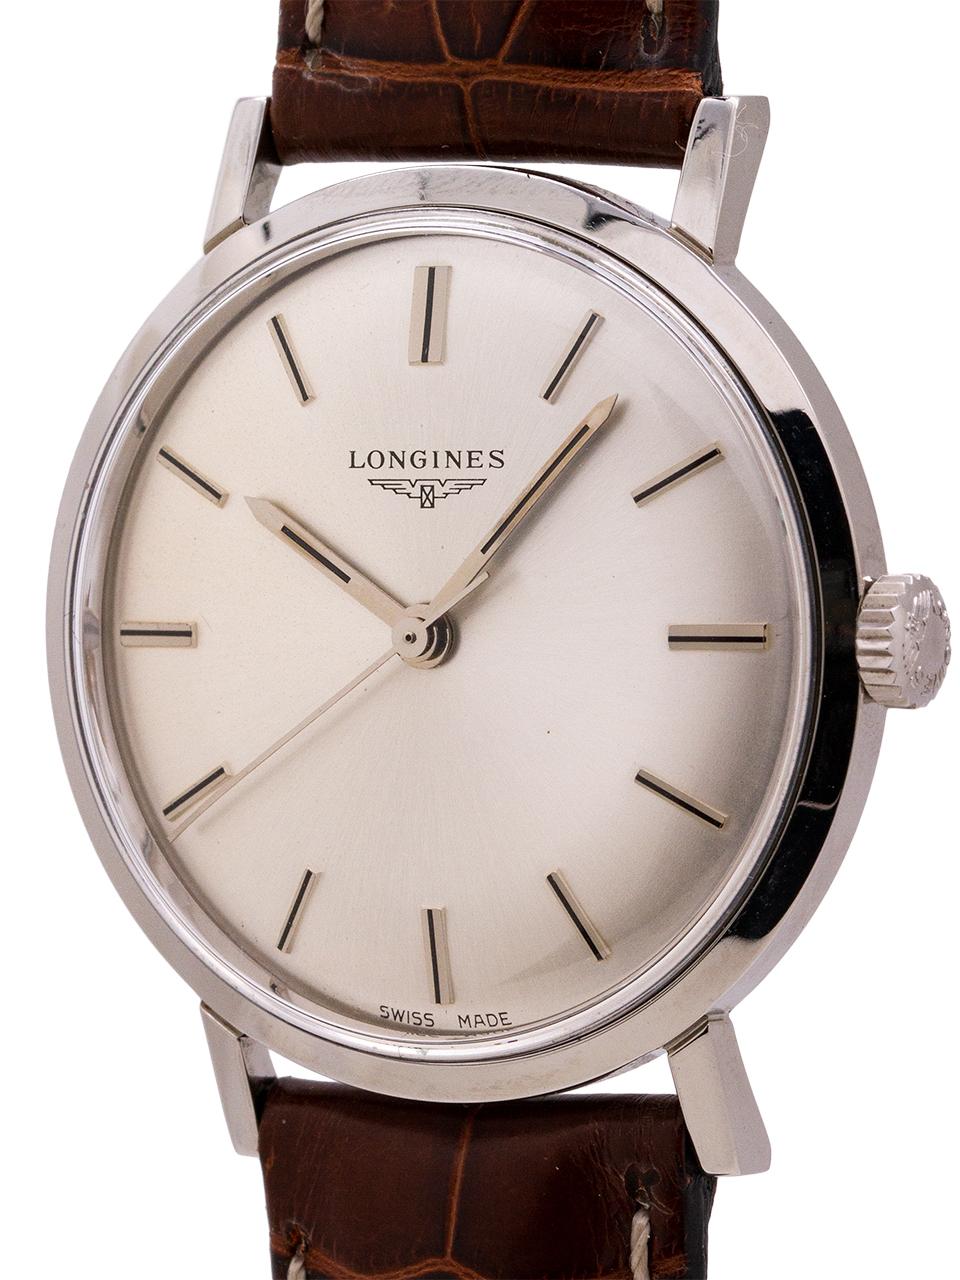 
Very minty condition vintage Longines dress model circa 1960’s. Featuring unpolished 35mm diameter case with snap down back, stepped bezel, and straight extended lugs. With minty condition original silver satin dial with applied silver indexes and